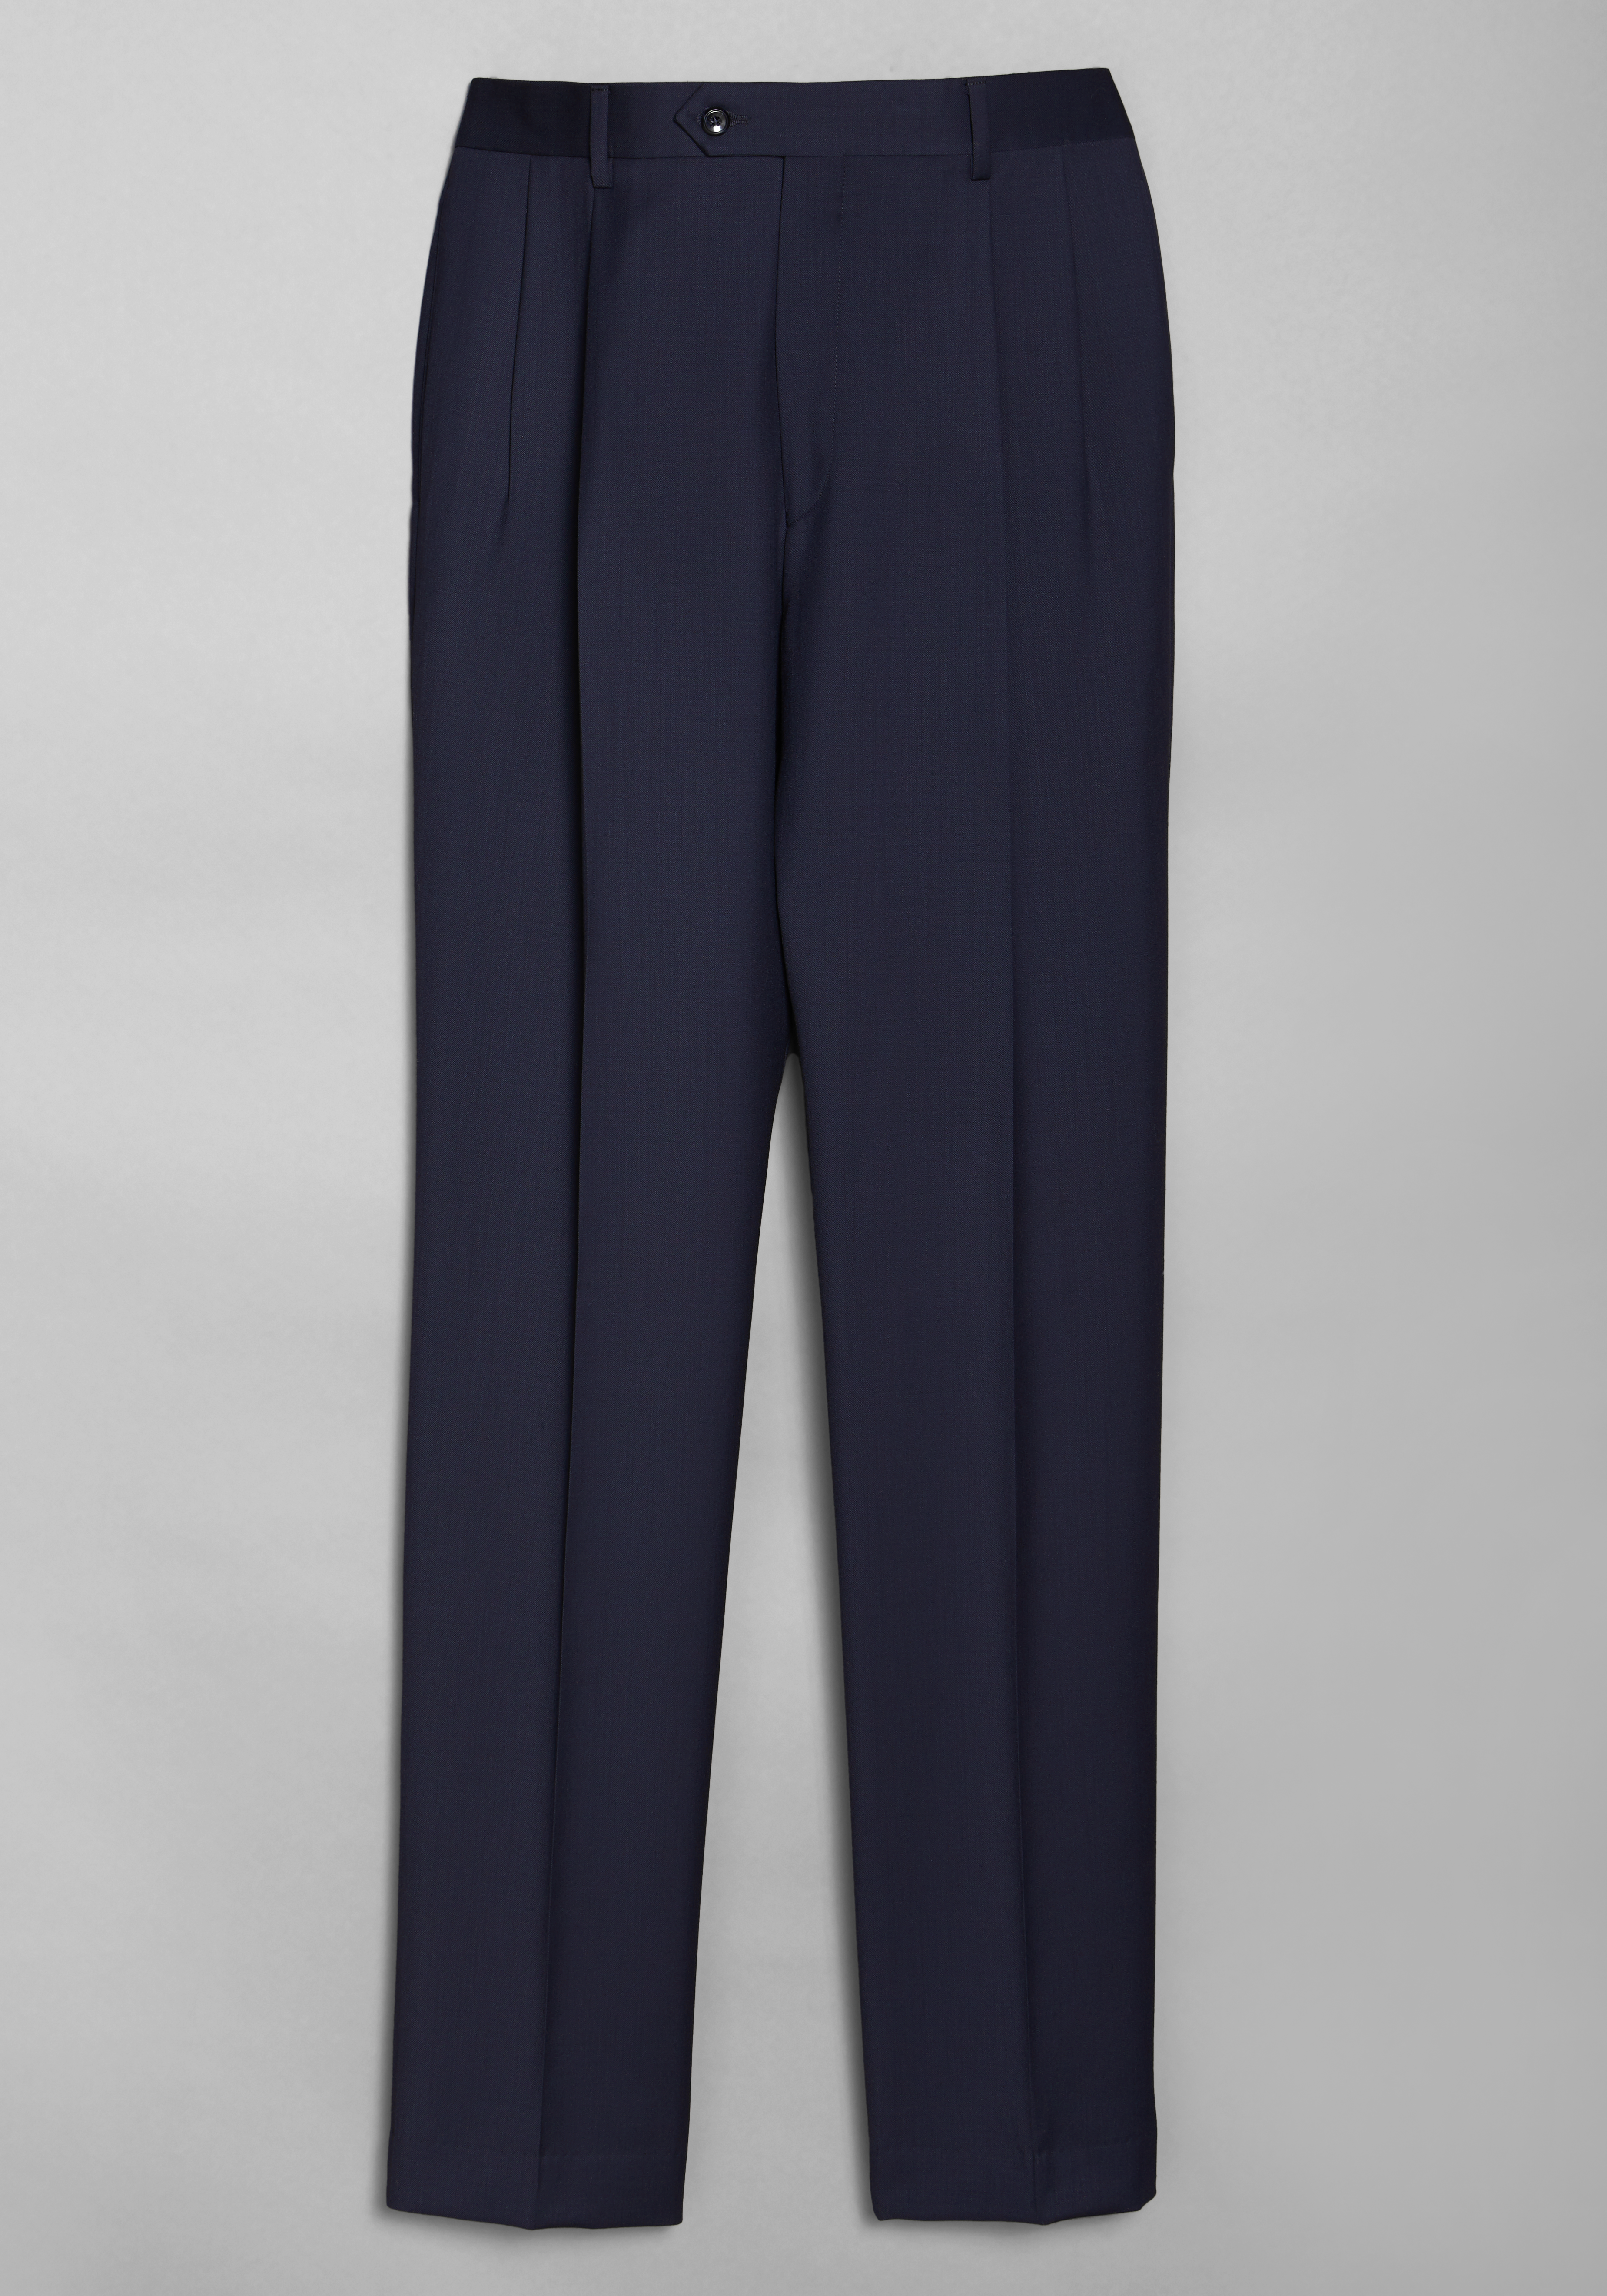 Executive Collection Executive Fit Wool Gabardine Pleated Dress Pants ...